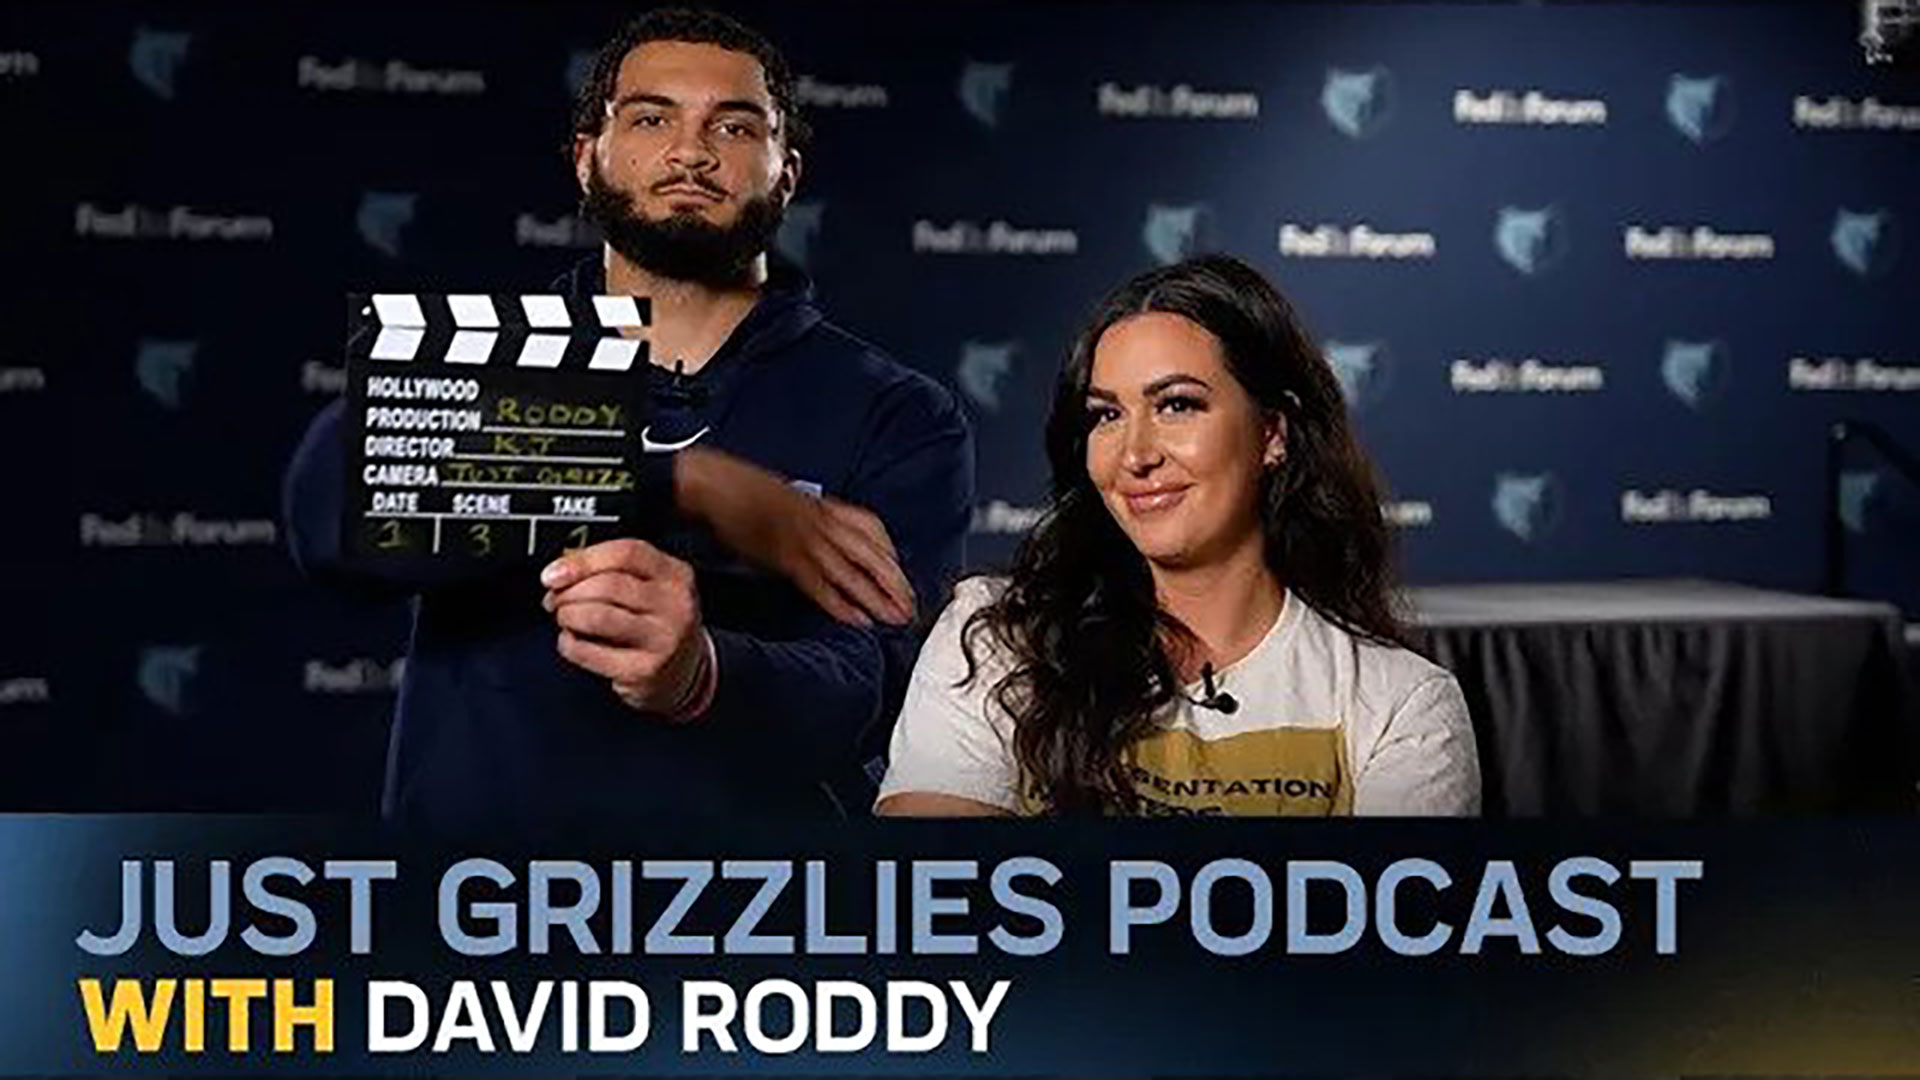 David Roddy on his mentality as a rookie | Just Grizzlies